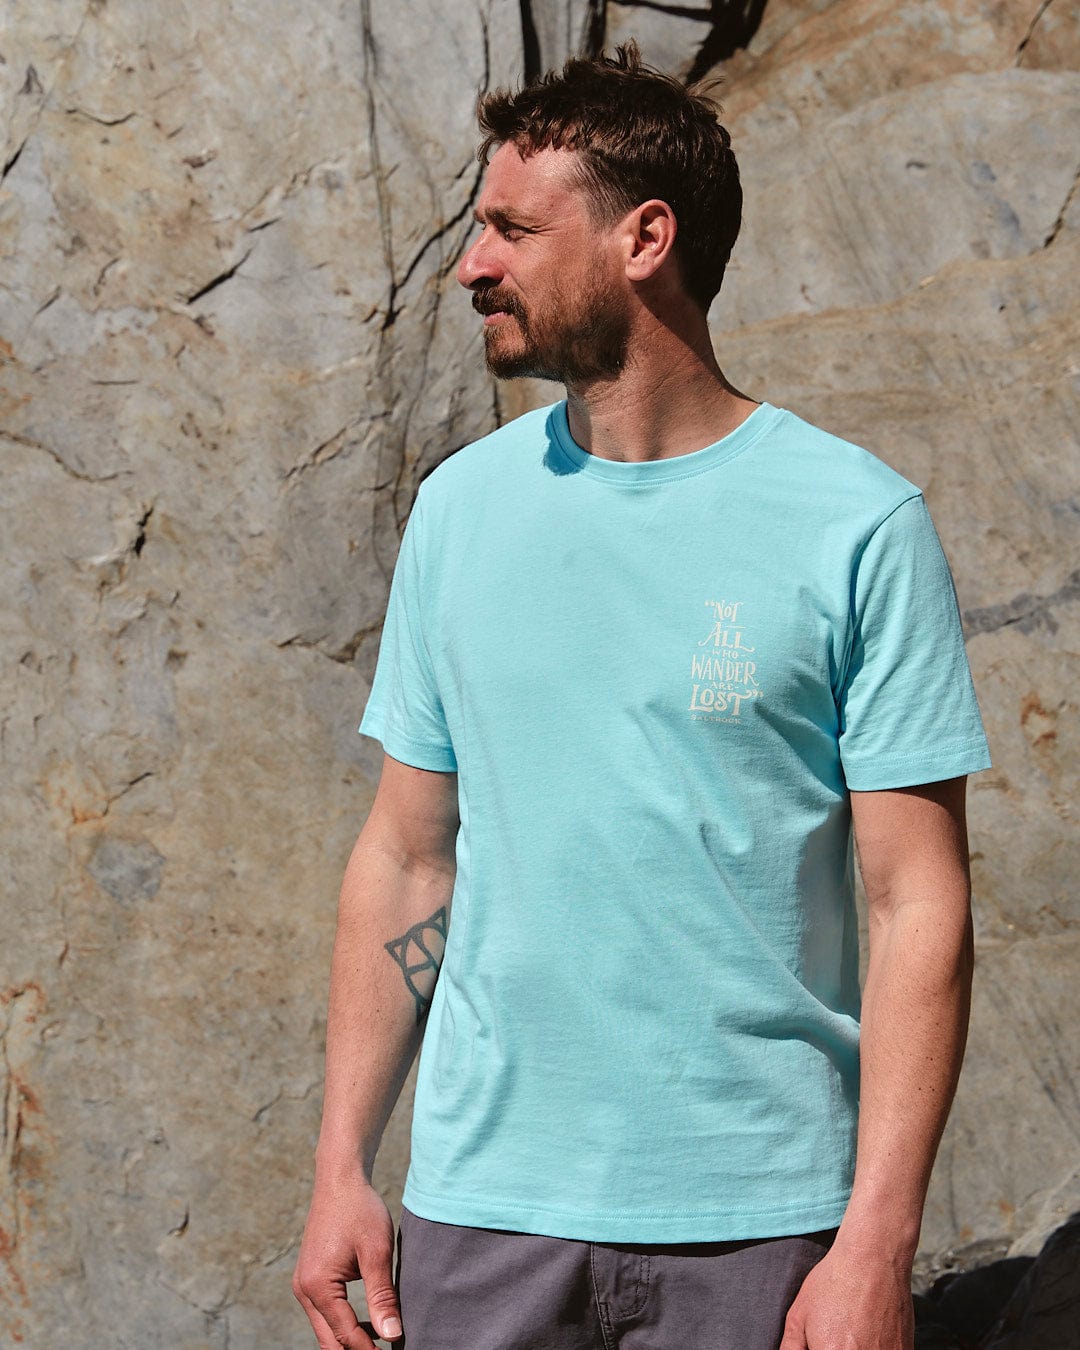 A man in a Lost Ships - Mens Short Sleeve T-Shirt in Turquoise by Saltrock stands in front of a rock.